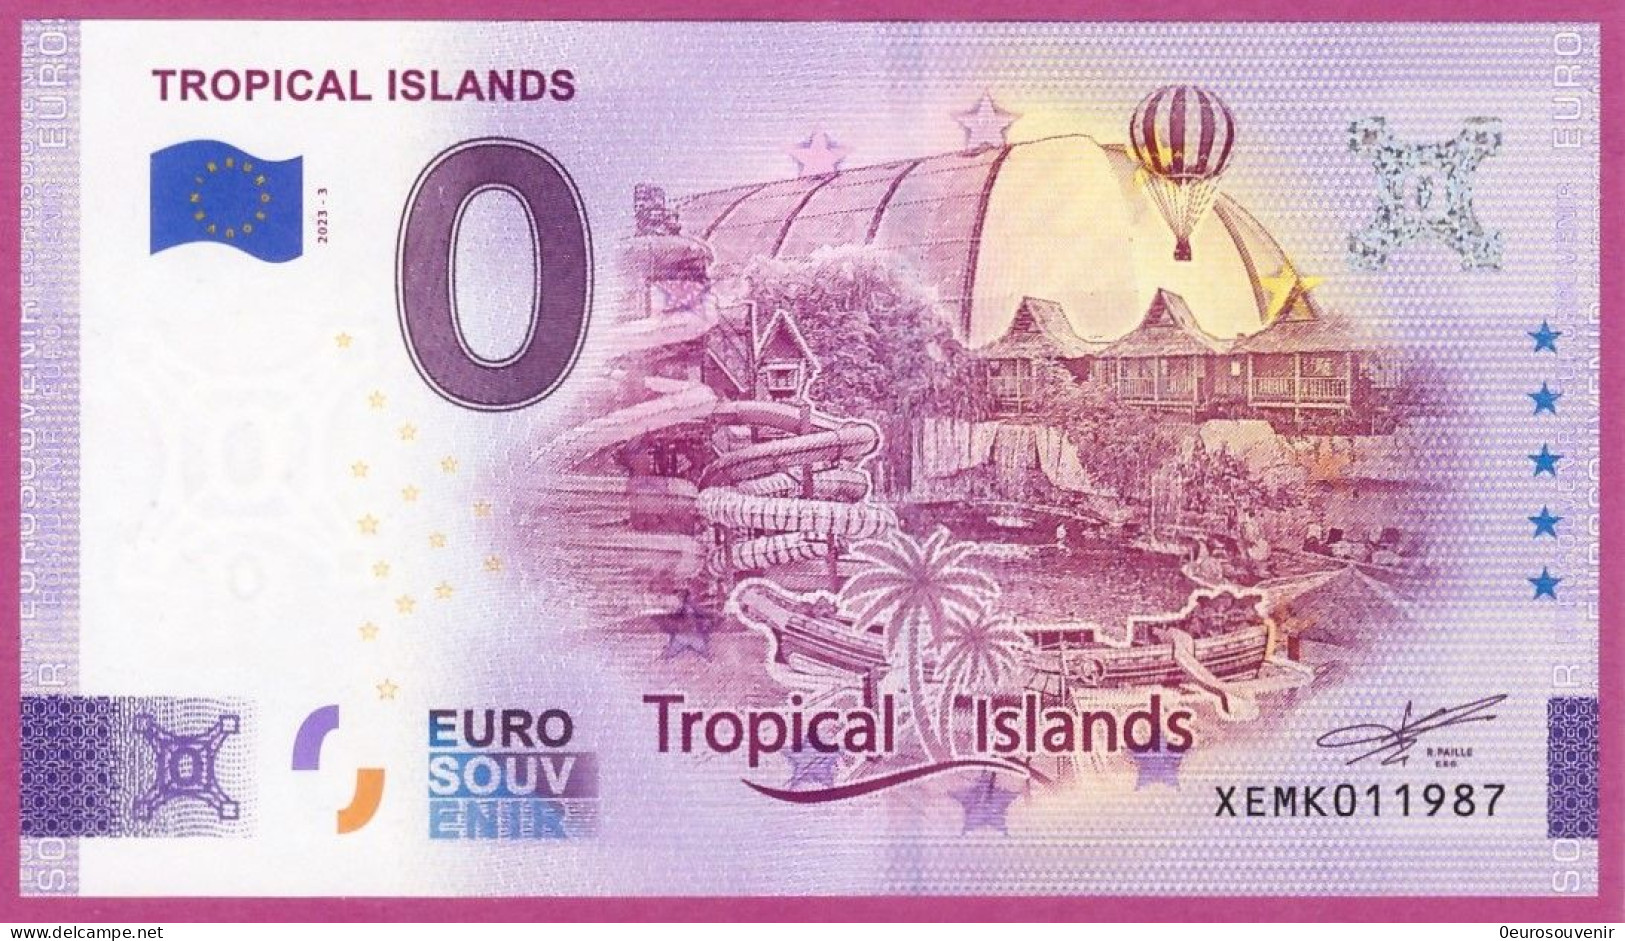 0-Euro XEMK 2023-3 TROPICAL ISLANDS - KRAUSNICK - Private Proofs / Unofficial